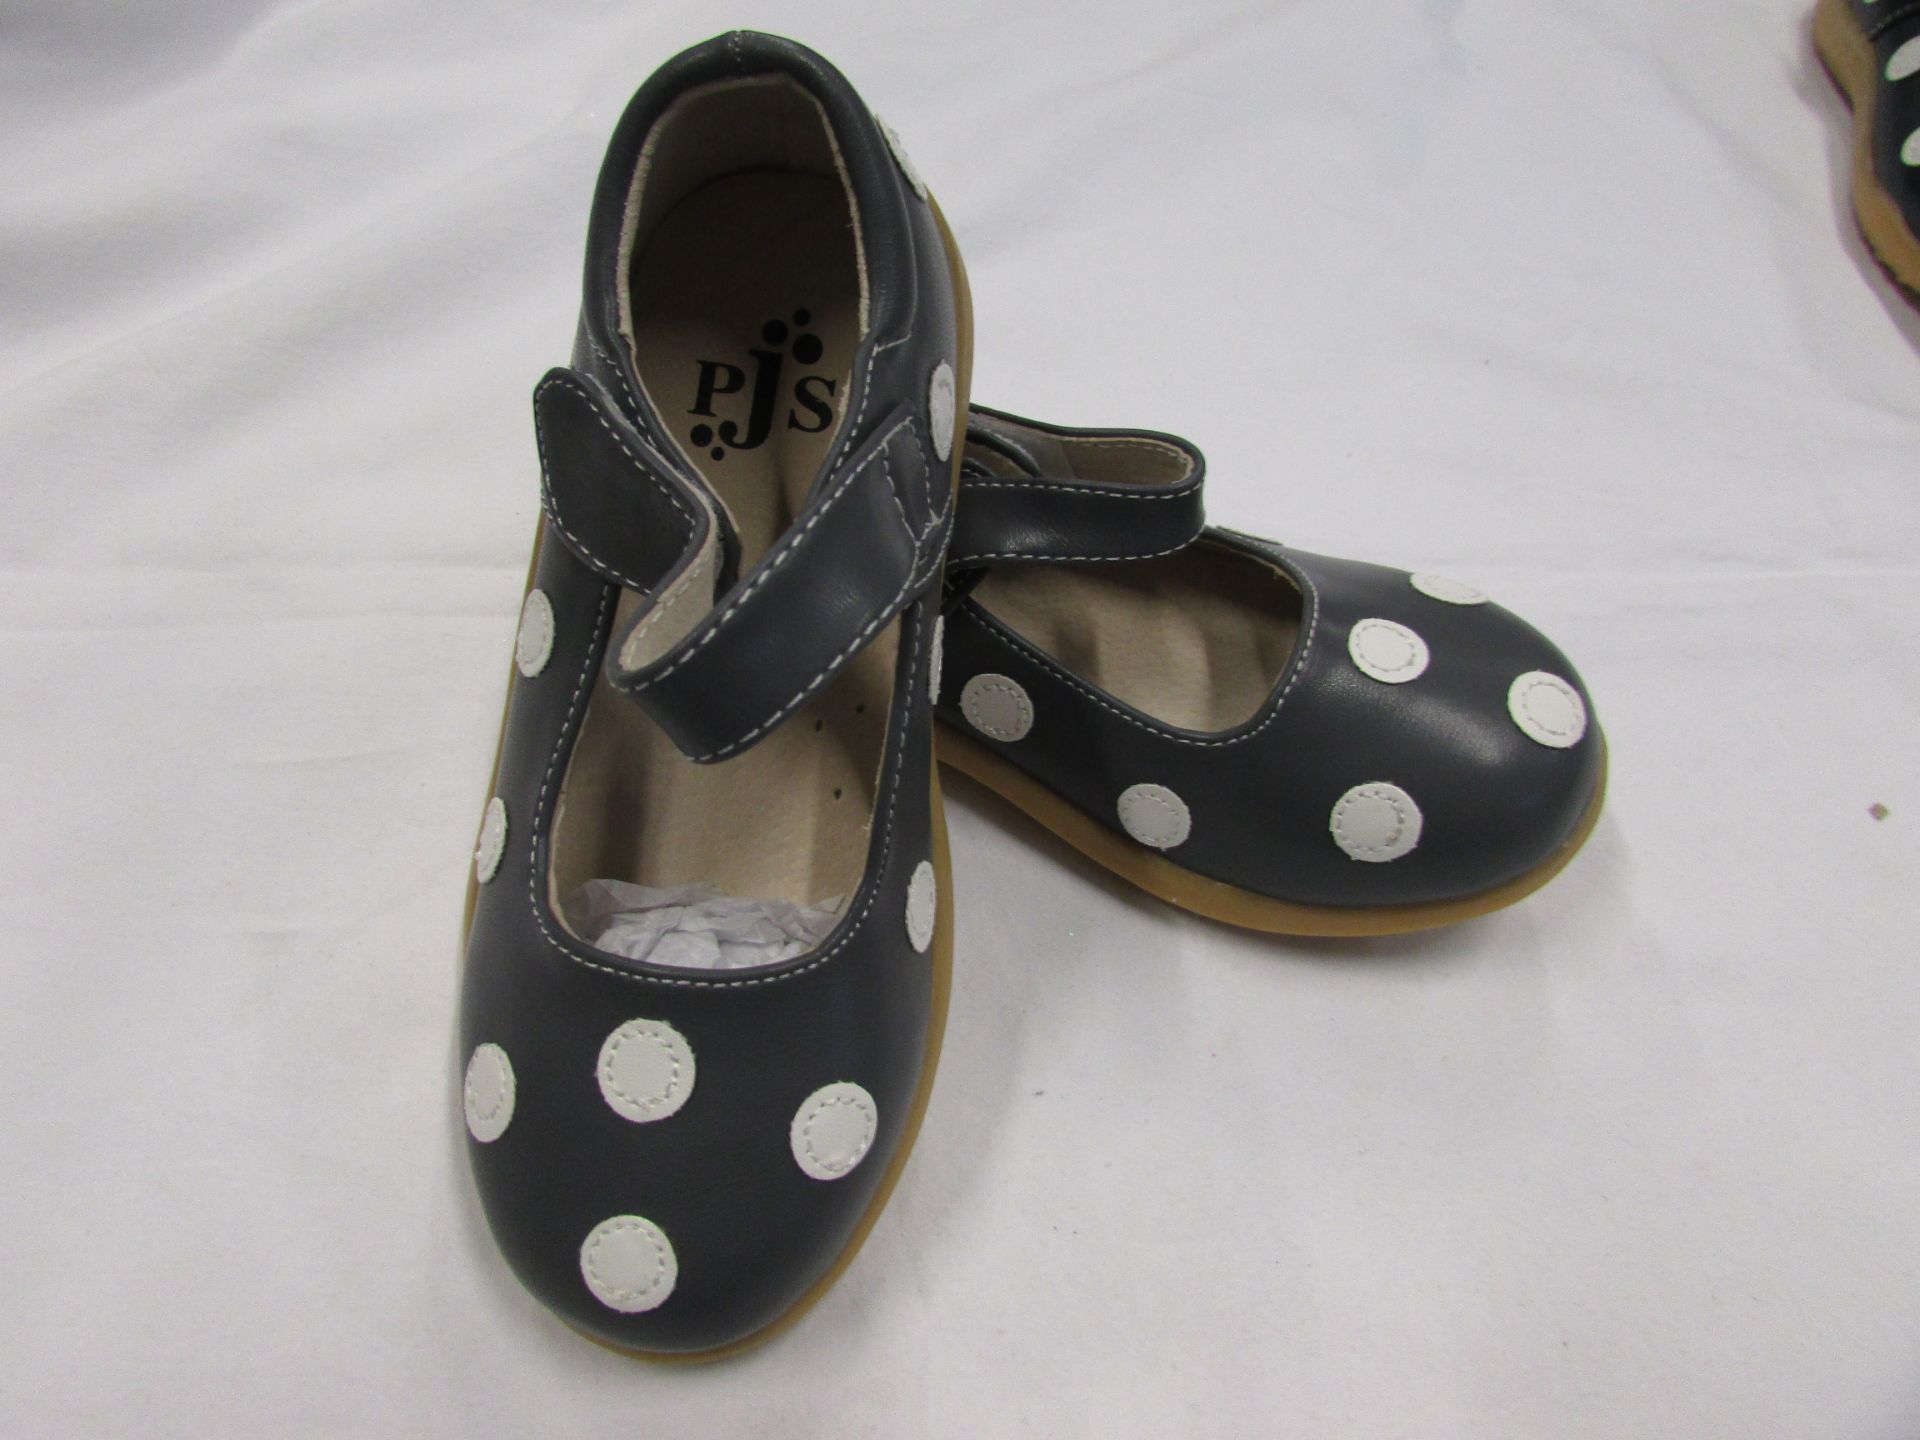 Puddle Jumper Shoes In Gray/White Spots (Usa Size: 10) (Unboxed)